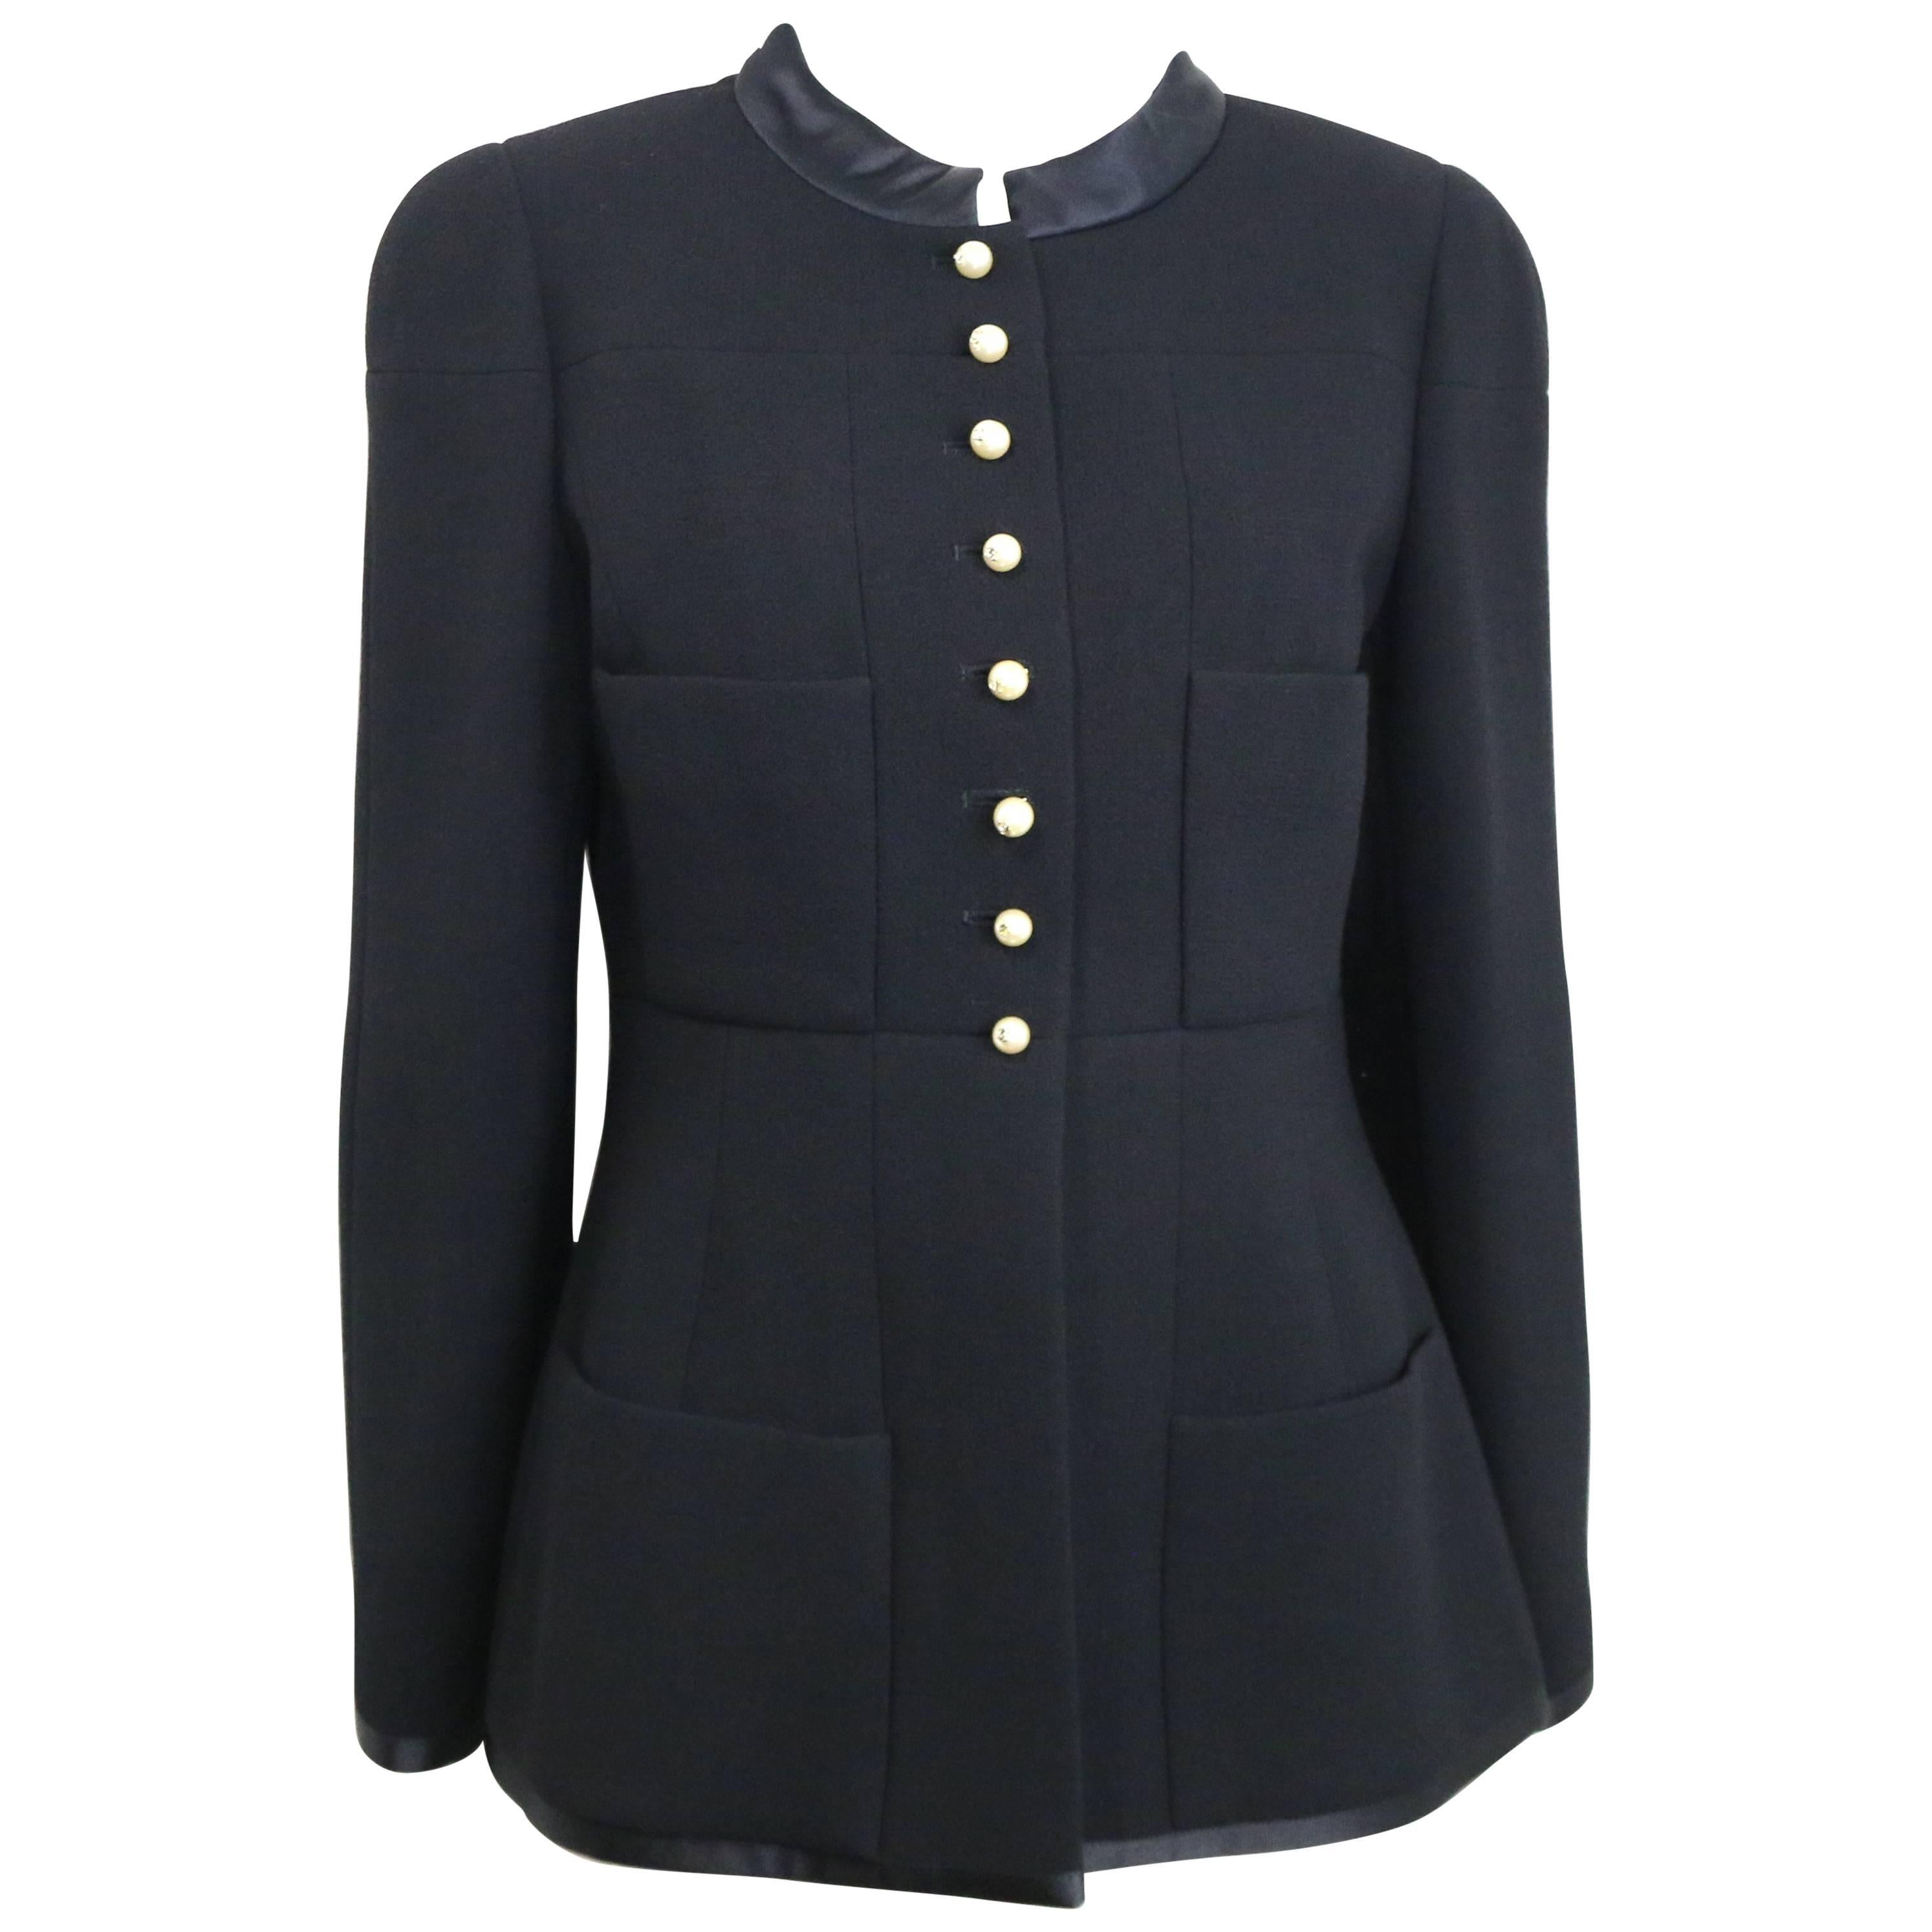 Chanel Black Wool and Silk Jacket with Faux "CC" Pearls Buttons